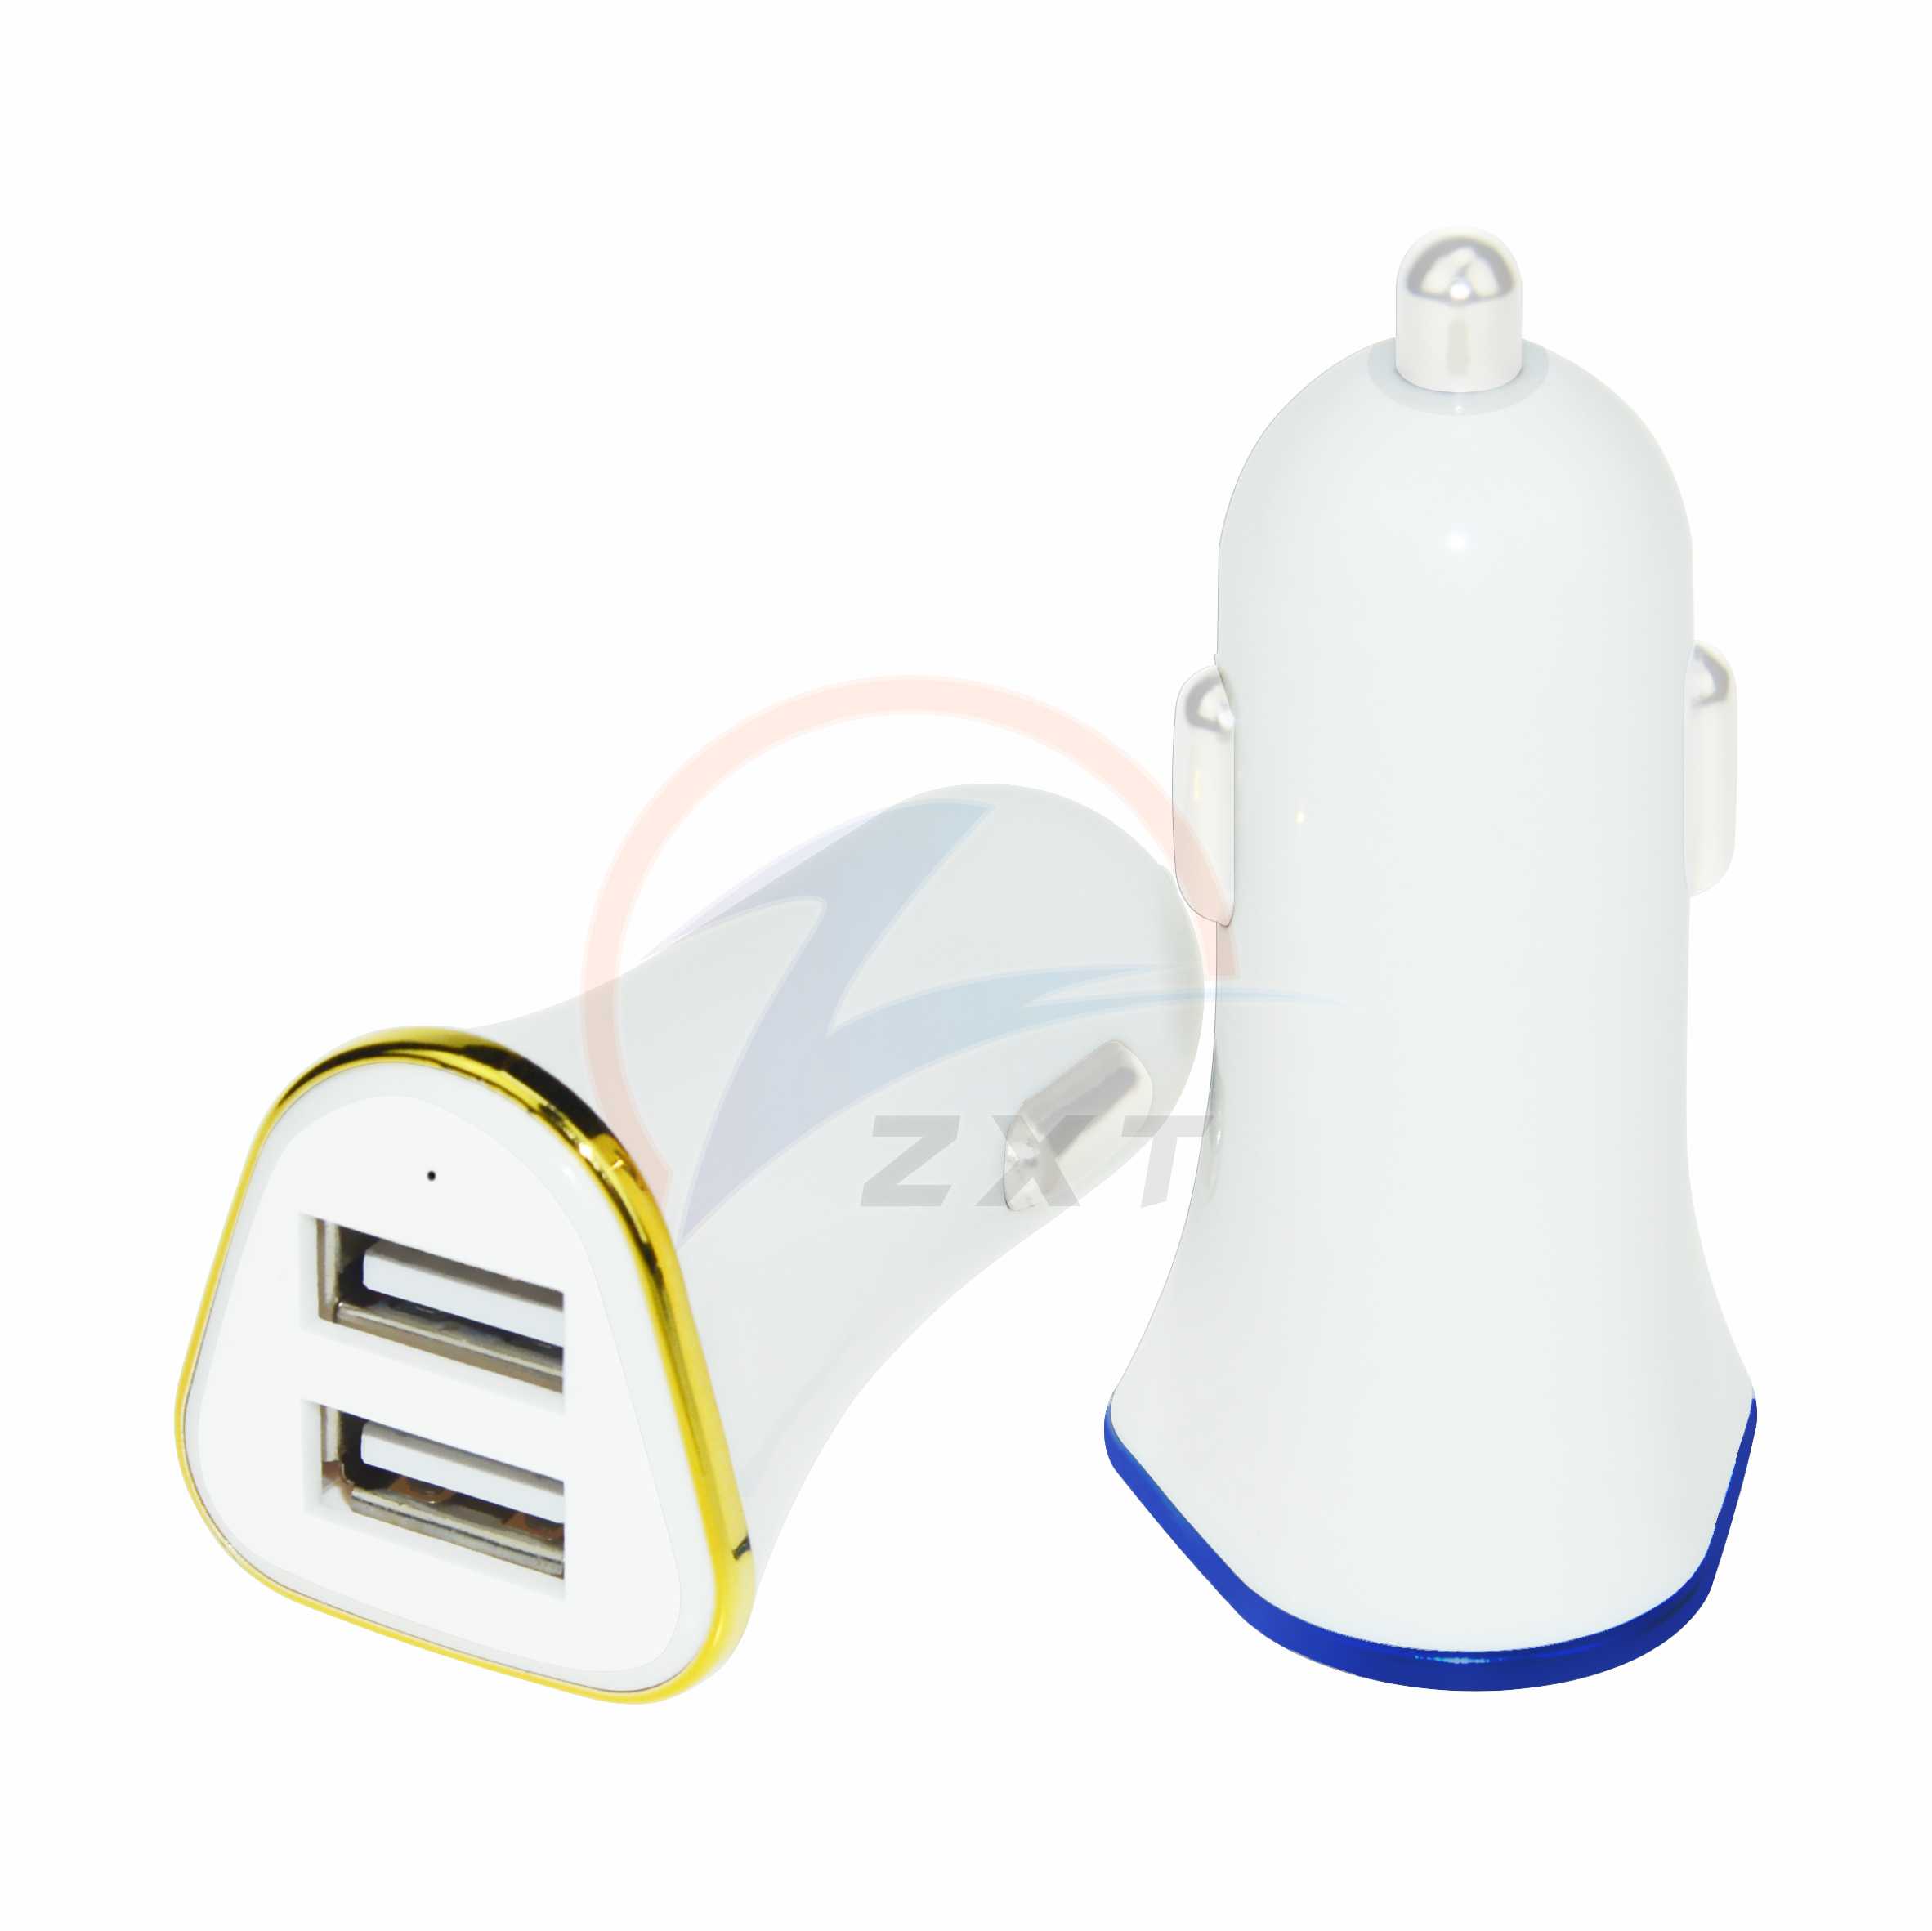 2 Ports Car Charger